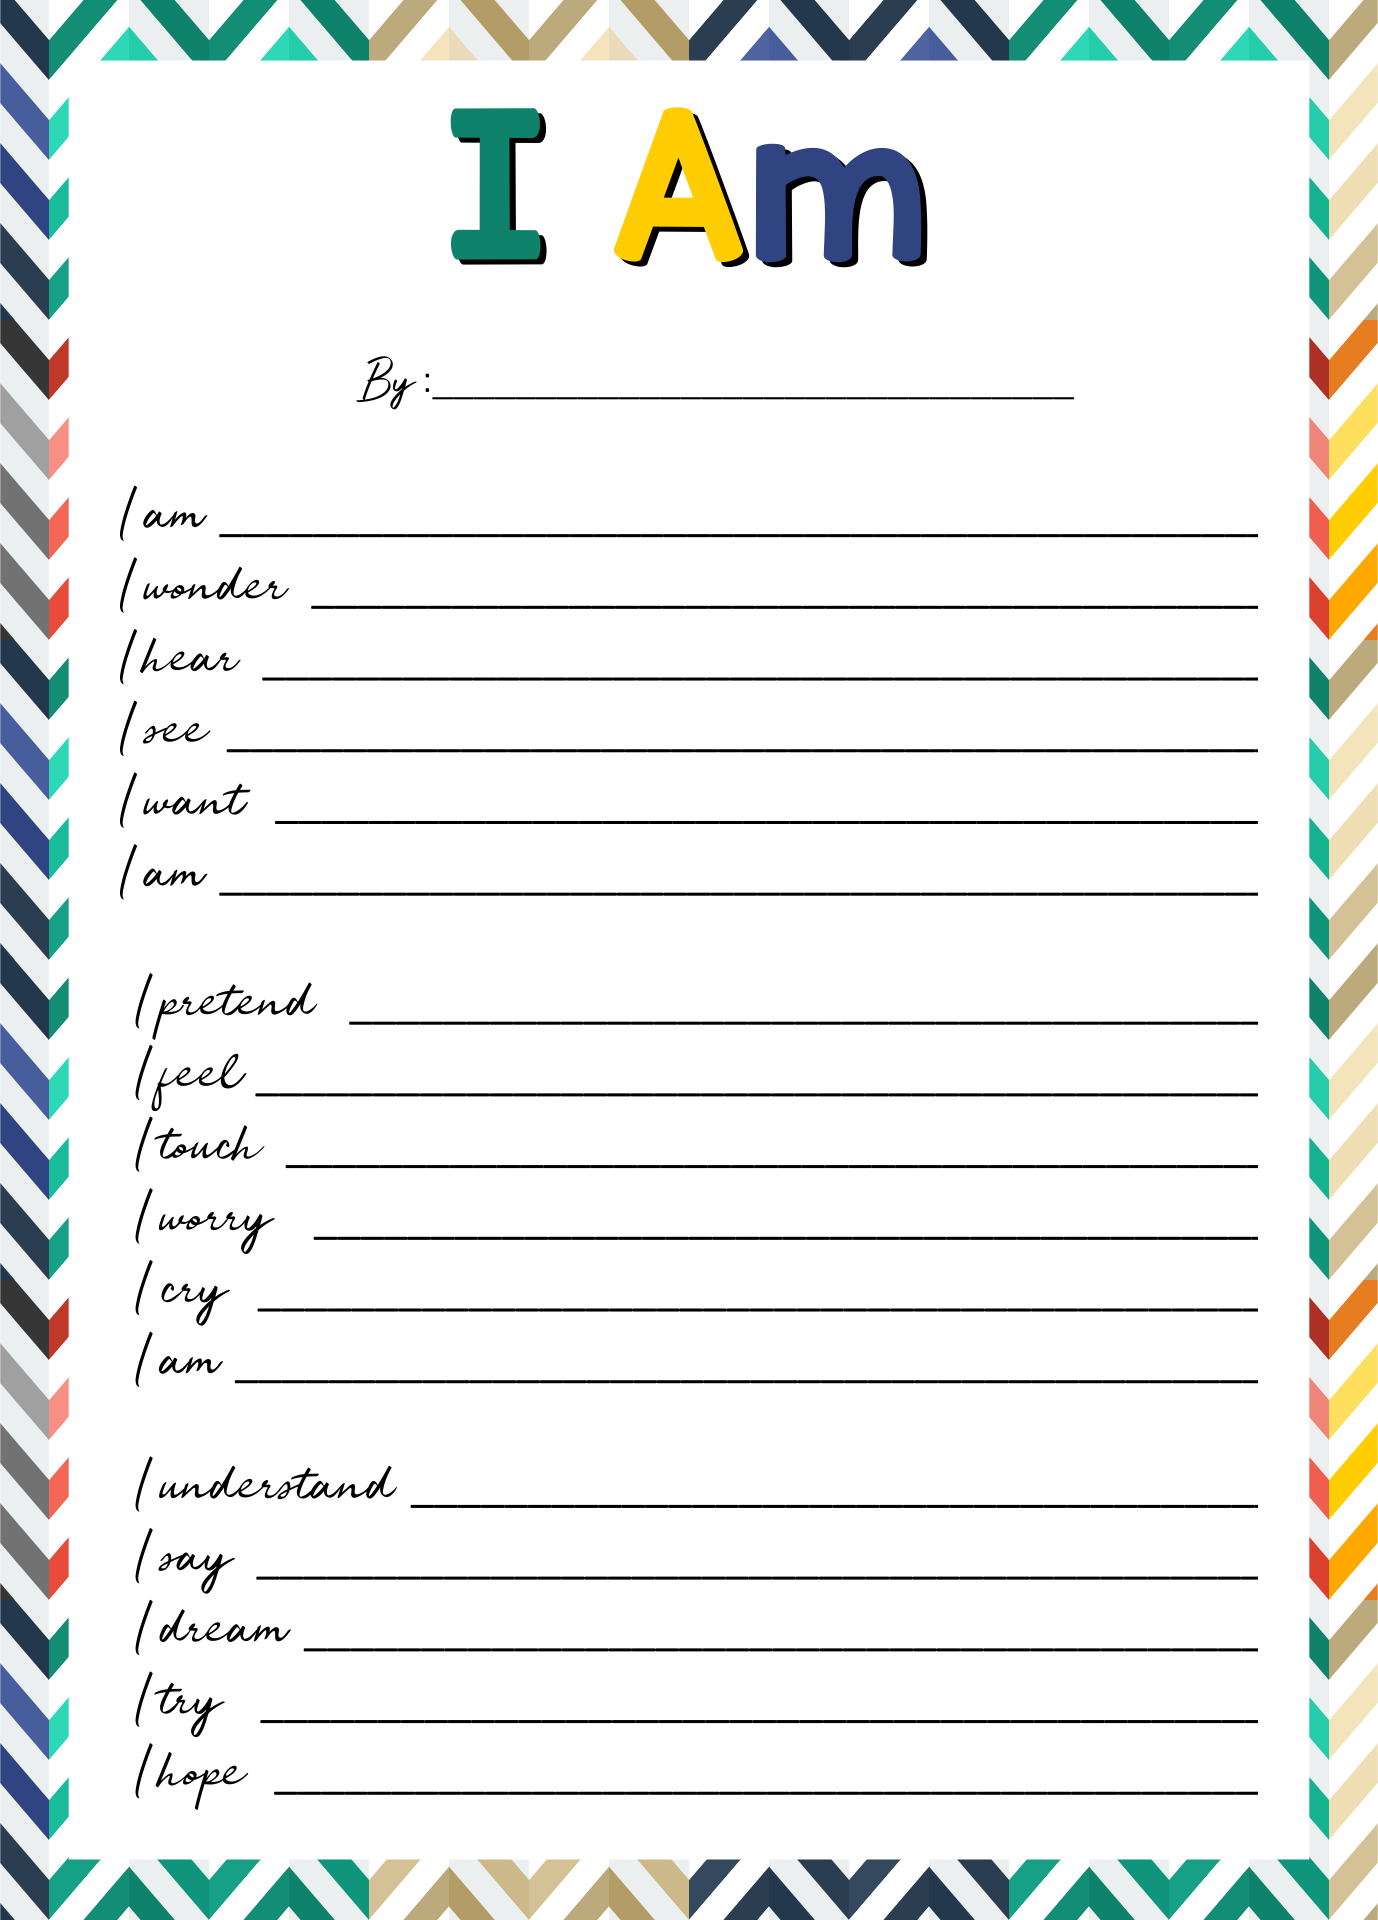 i-am-from-poem-template-printable-printable-templates